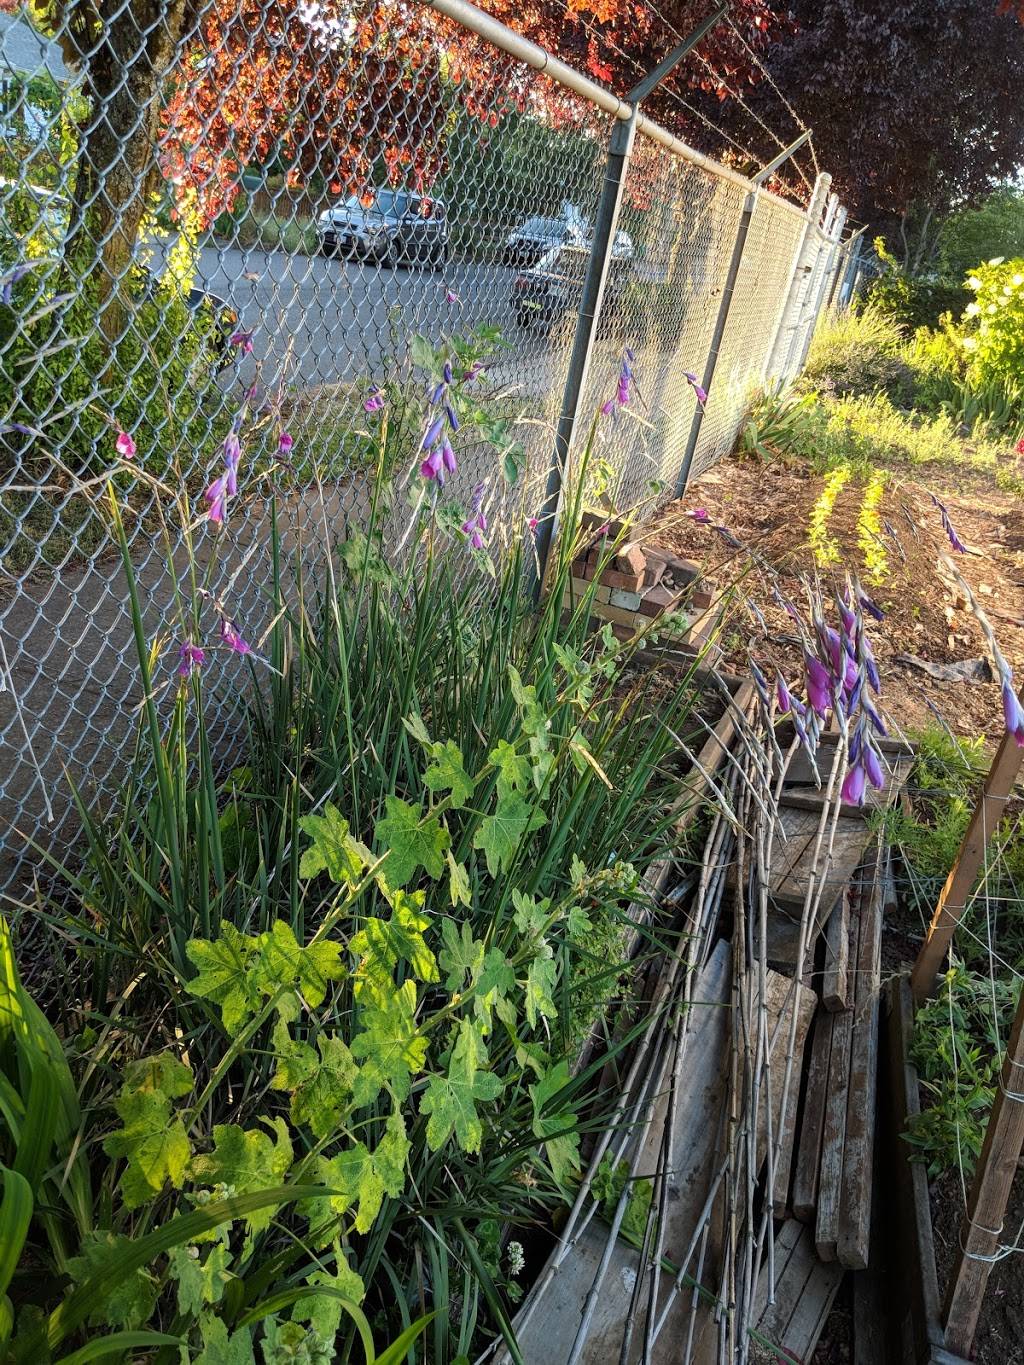 Brentwood Community Garden | 6866 SE 57th Ave, Portland, OR 97206 | Phone: (503) 823-1612